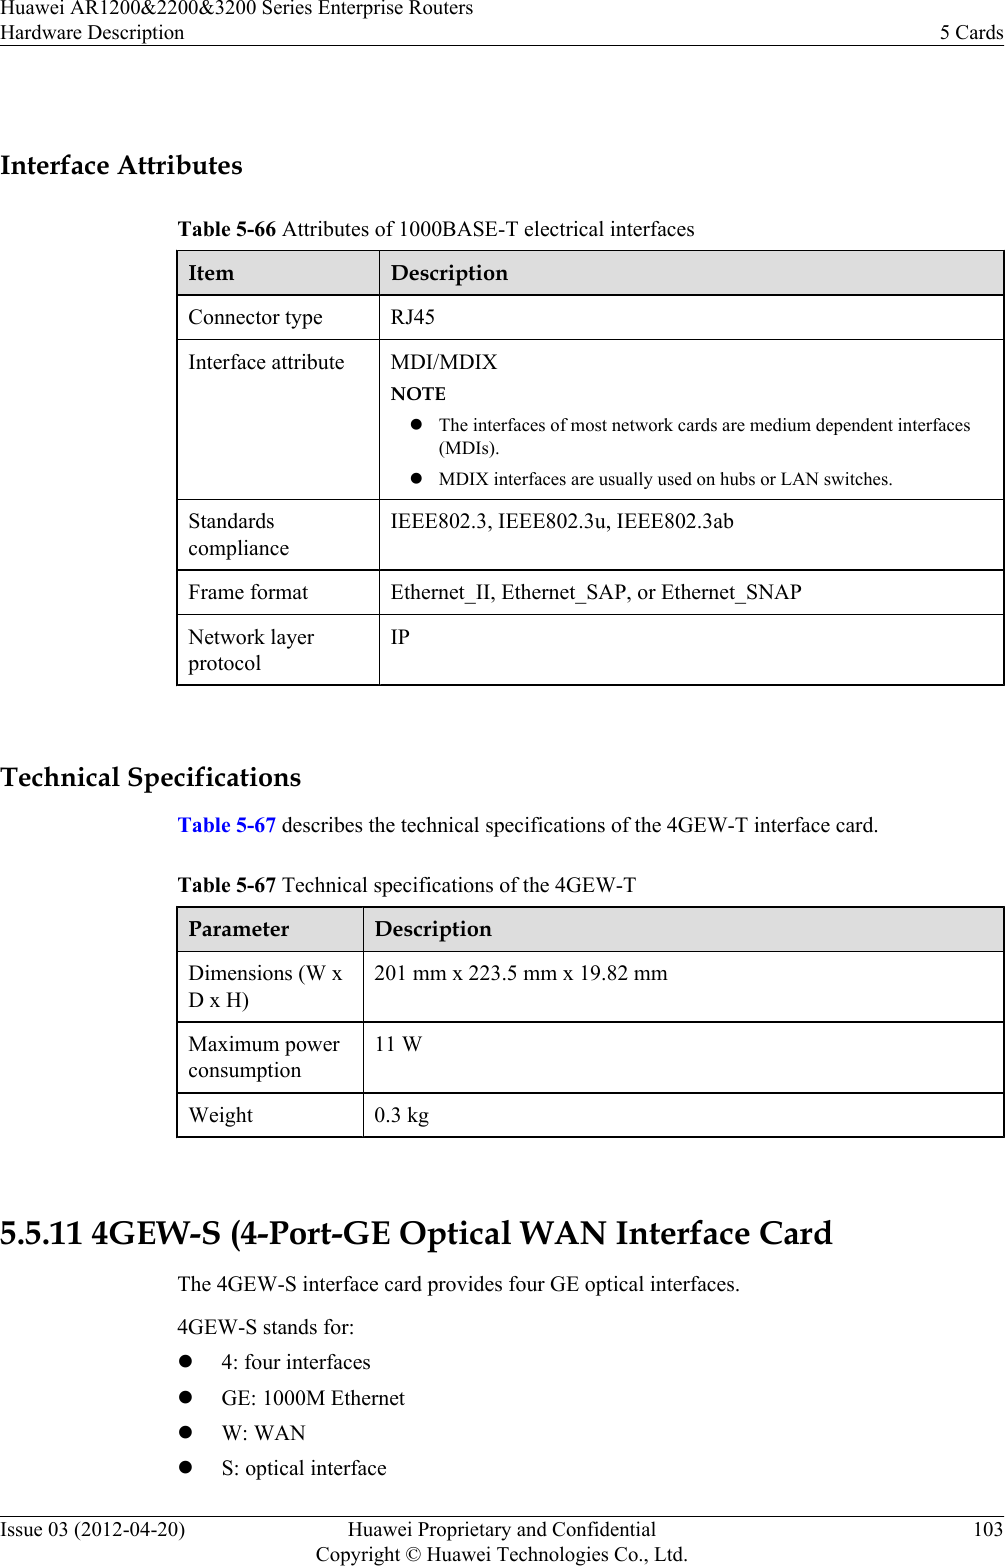  Interface AttributesTable 5-66 Attributes of 1000BASE-T electrical interfacesItem DescriptionConnector type RJ45Interface attribute MDI/MDIXNOTElThe interfaces of most network cards are medium dependent interfaces(MDIs).lMDIX interfaces are usually used on hubs or LAN switches.StandardscomplianceIEEE802.3, IEEE802.3u, IEEE802.3abFrame format Ethernet_II, Ethernet_SAP, or Ethernet_SNAPNetwork layerprotocolIP Technical SpecificationsTable 5-67 describes the technical specifications of the 4GEW-T interface card.Table 5-67 Technical specifications of the 4GEW-TParameter DescriptionDimensions (W xD x H)201 mm x 223.5 mm x 19.82 mmMaximum powerconsumption11 WWeight 0.3 kg 5.5.11 4GEW-S (4-Port-GE Optical WAN Interface CardThe 4GEW-S interface card provides four GE optical interfaces.4GEW-S stands for:l4: four interfaceslGE: 1000M EthernetlW: WANlS: optical interfaceHuawei AR1200&amp;2200&amp;3200 Series Enterprise RoutersHardware Description 5 CardsIssue 03 (2012-04-20) Huawei Proprietary and ConfidentialCopyright © Huawei Technologies Co., Ltd.103